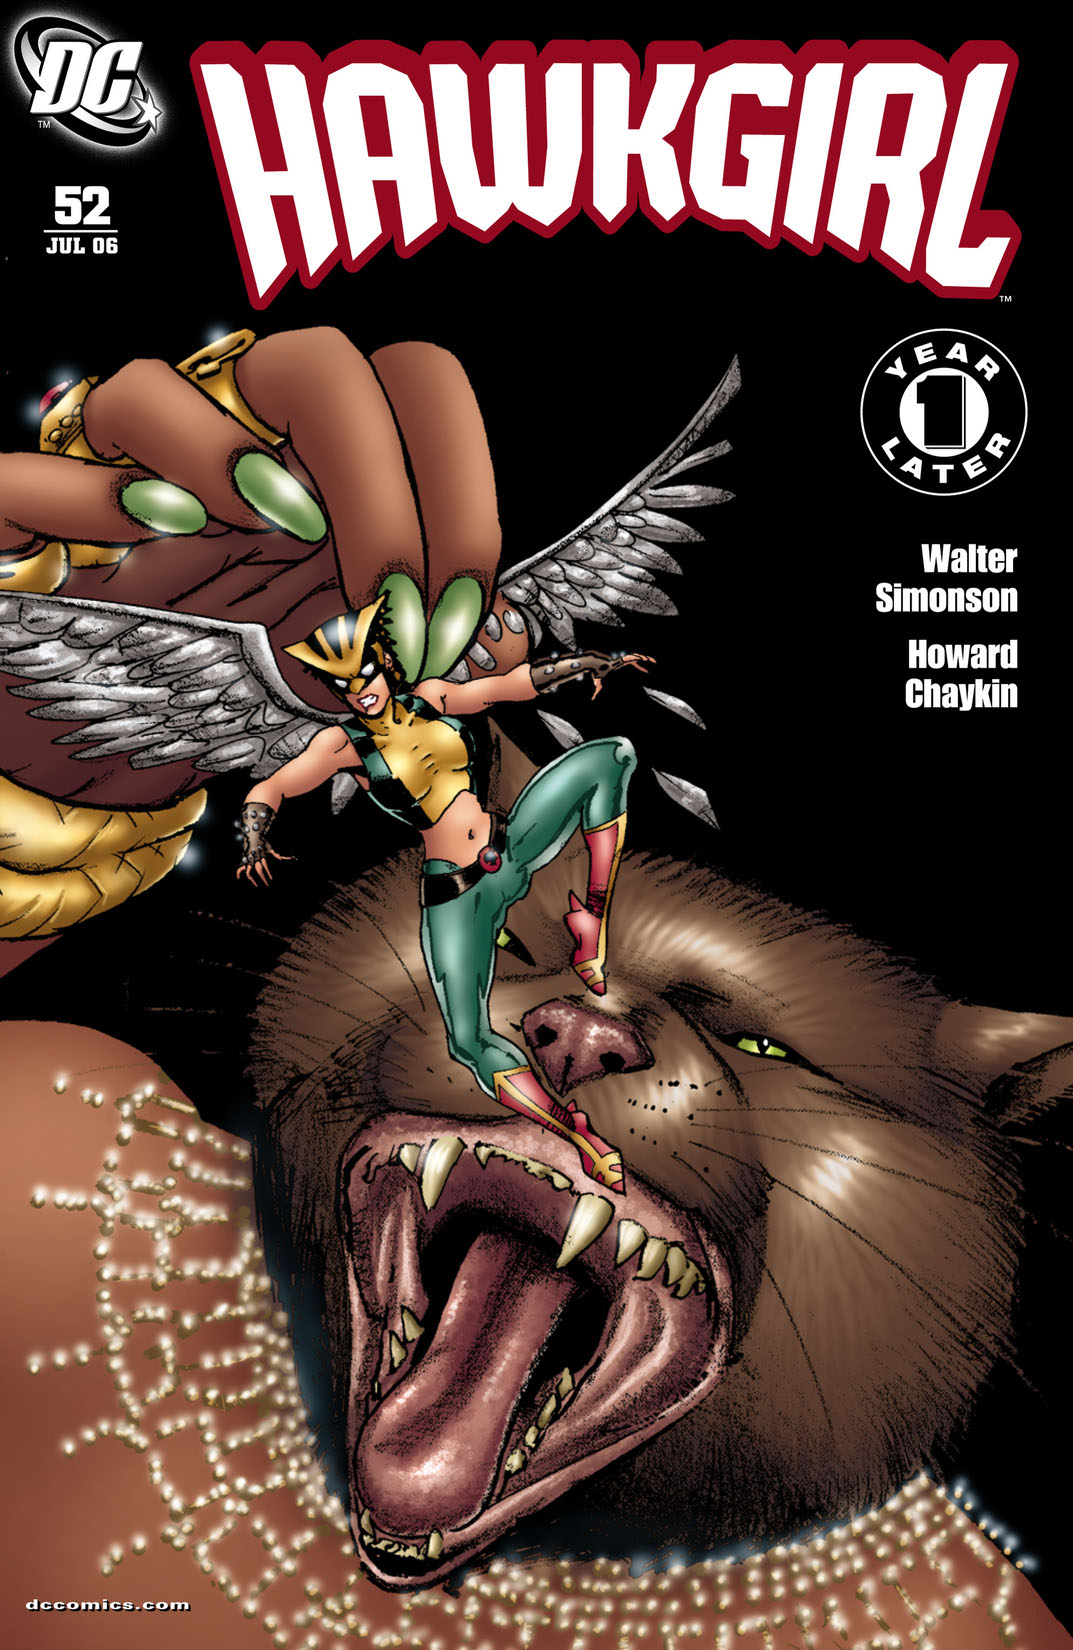 Hawkgirl #52 preview images